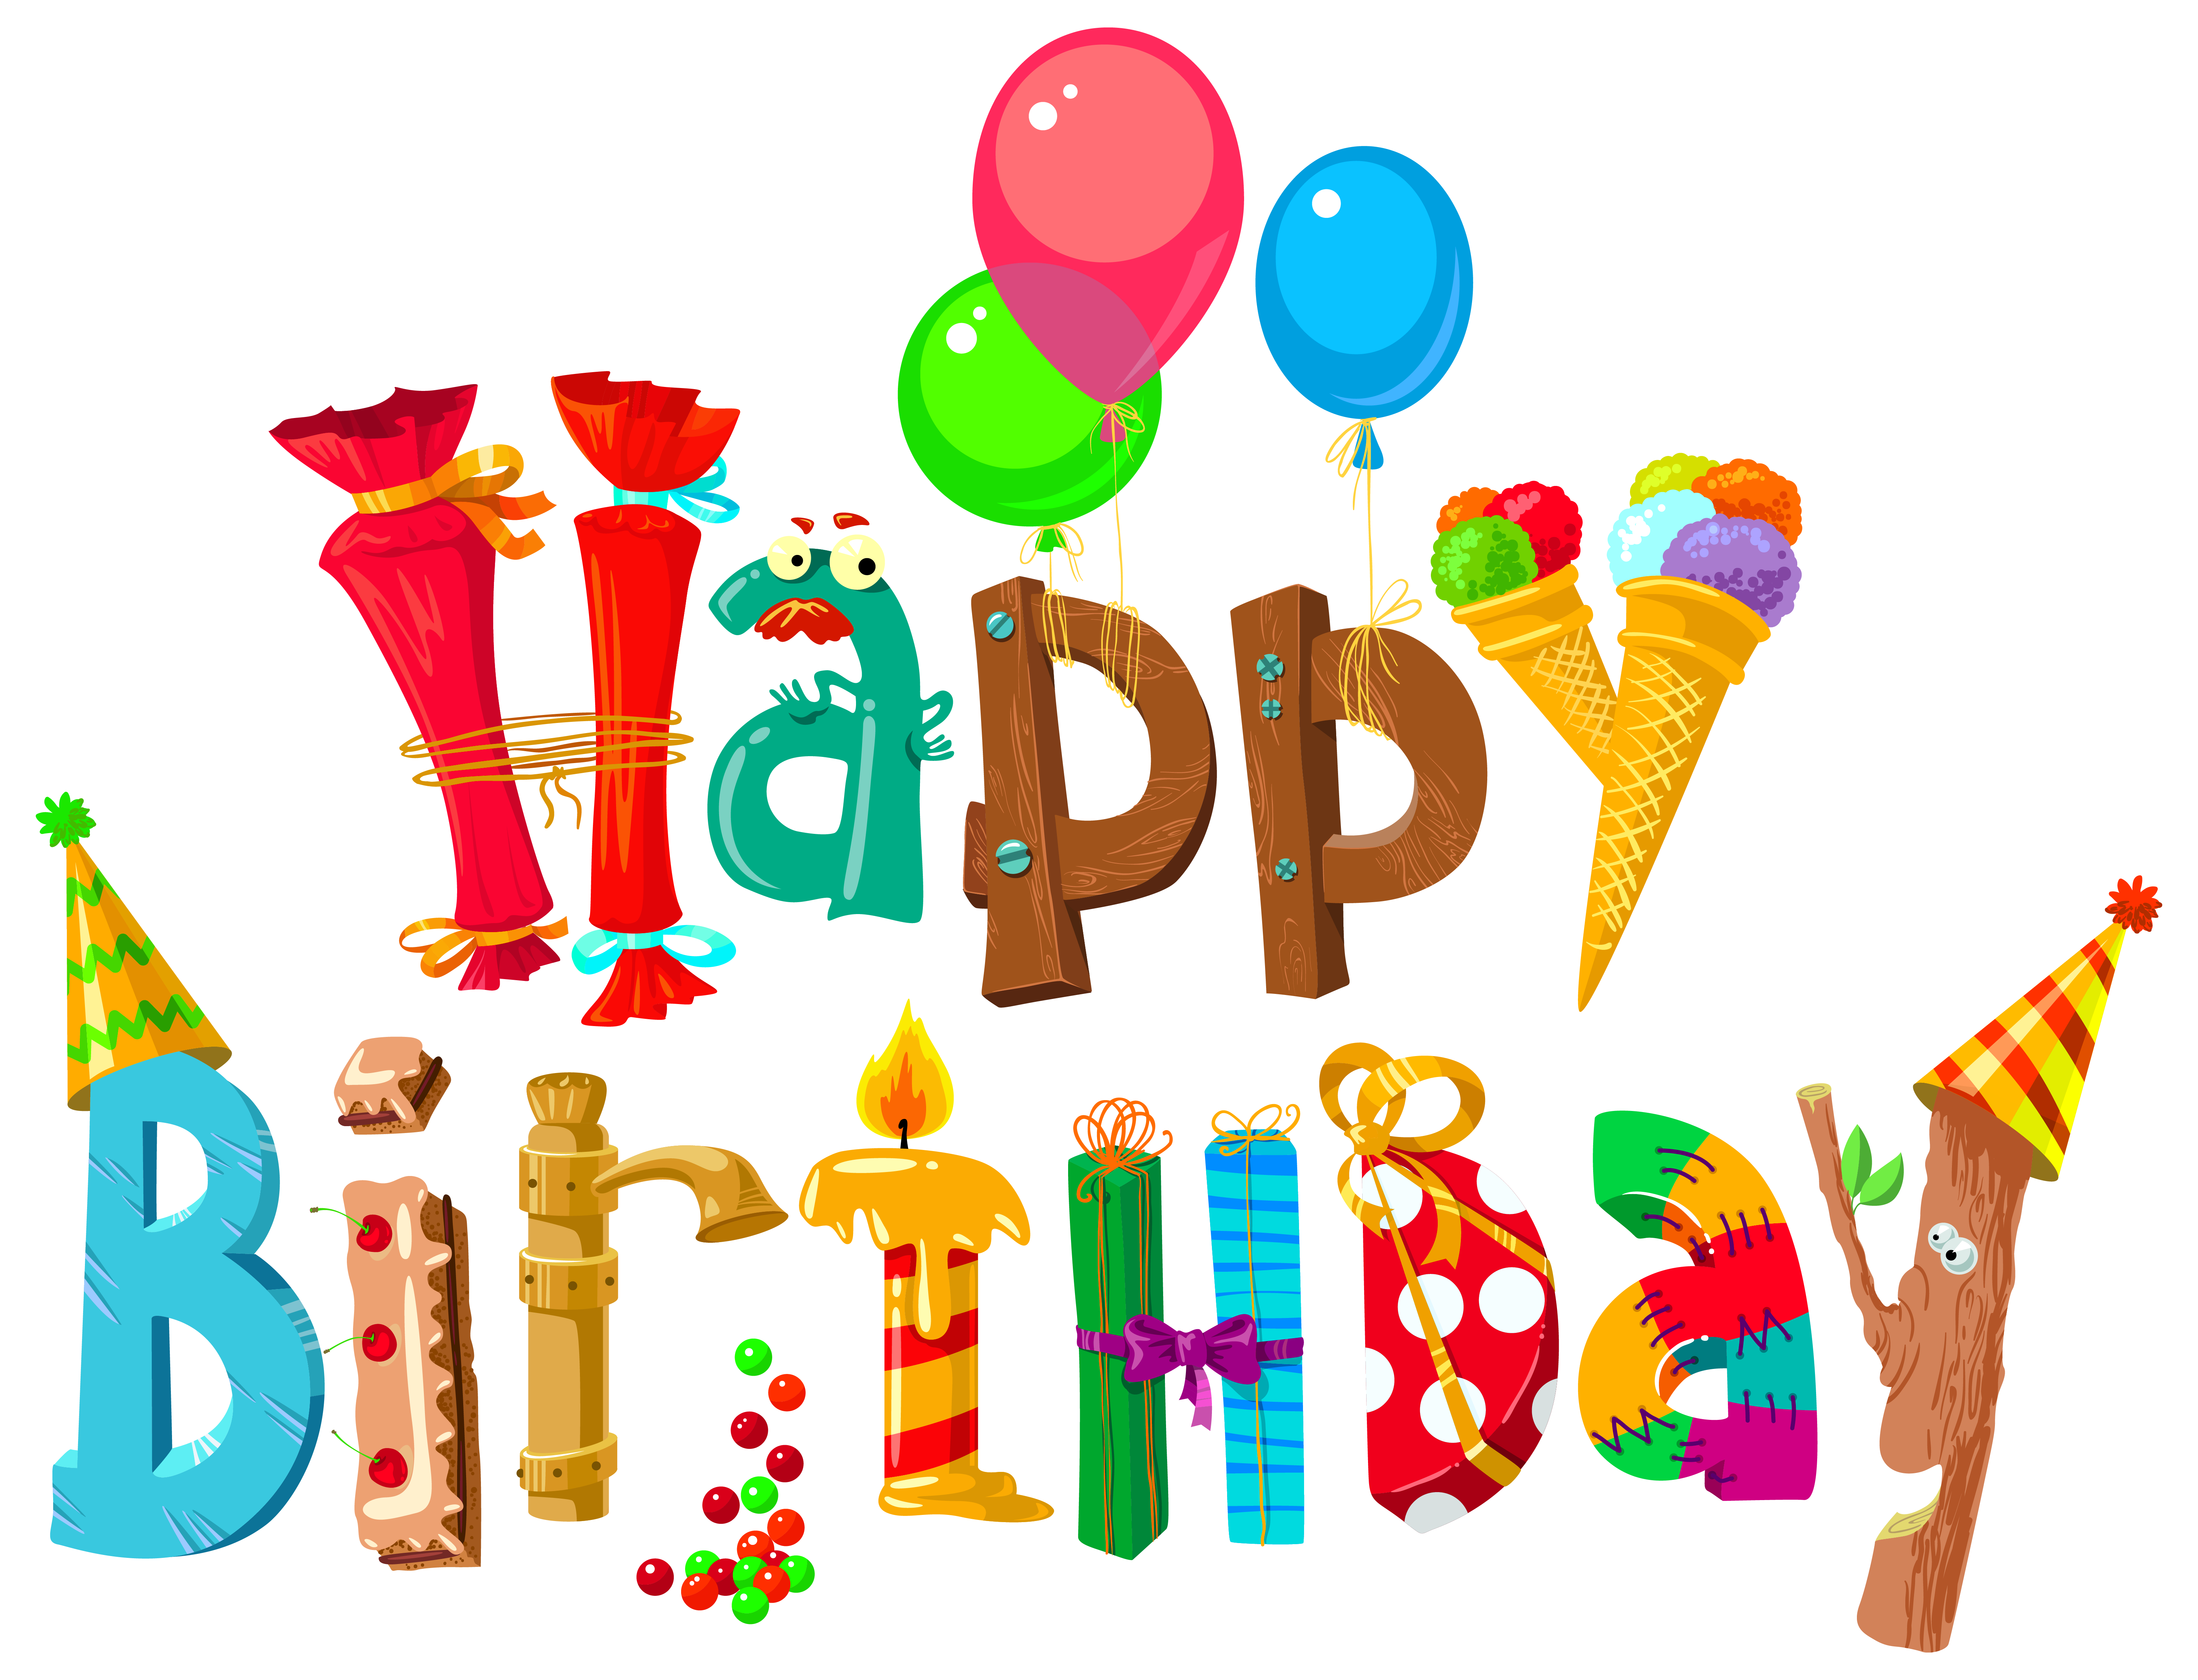 Heaven clipart all things bright and beautiful. Funny happy birthday image